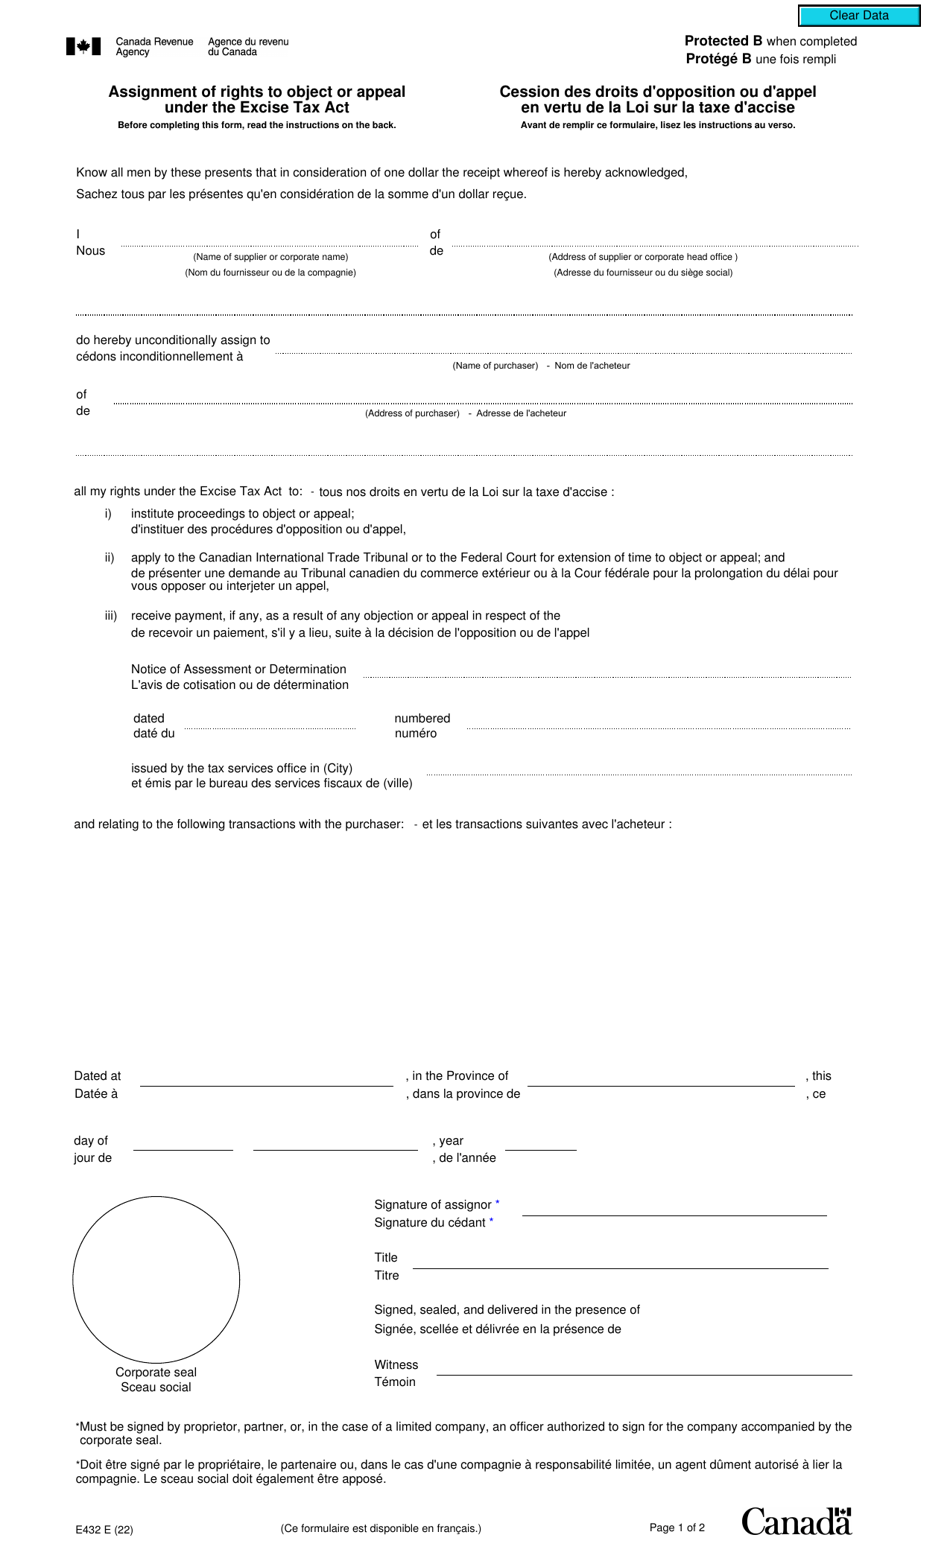 Form E432 Assignment of Rights to Object or Appeal Under the Excise Tax Act - Canada (English / French), Page 1